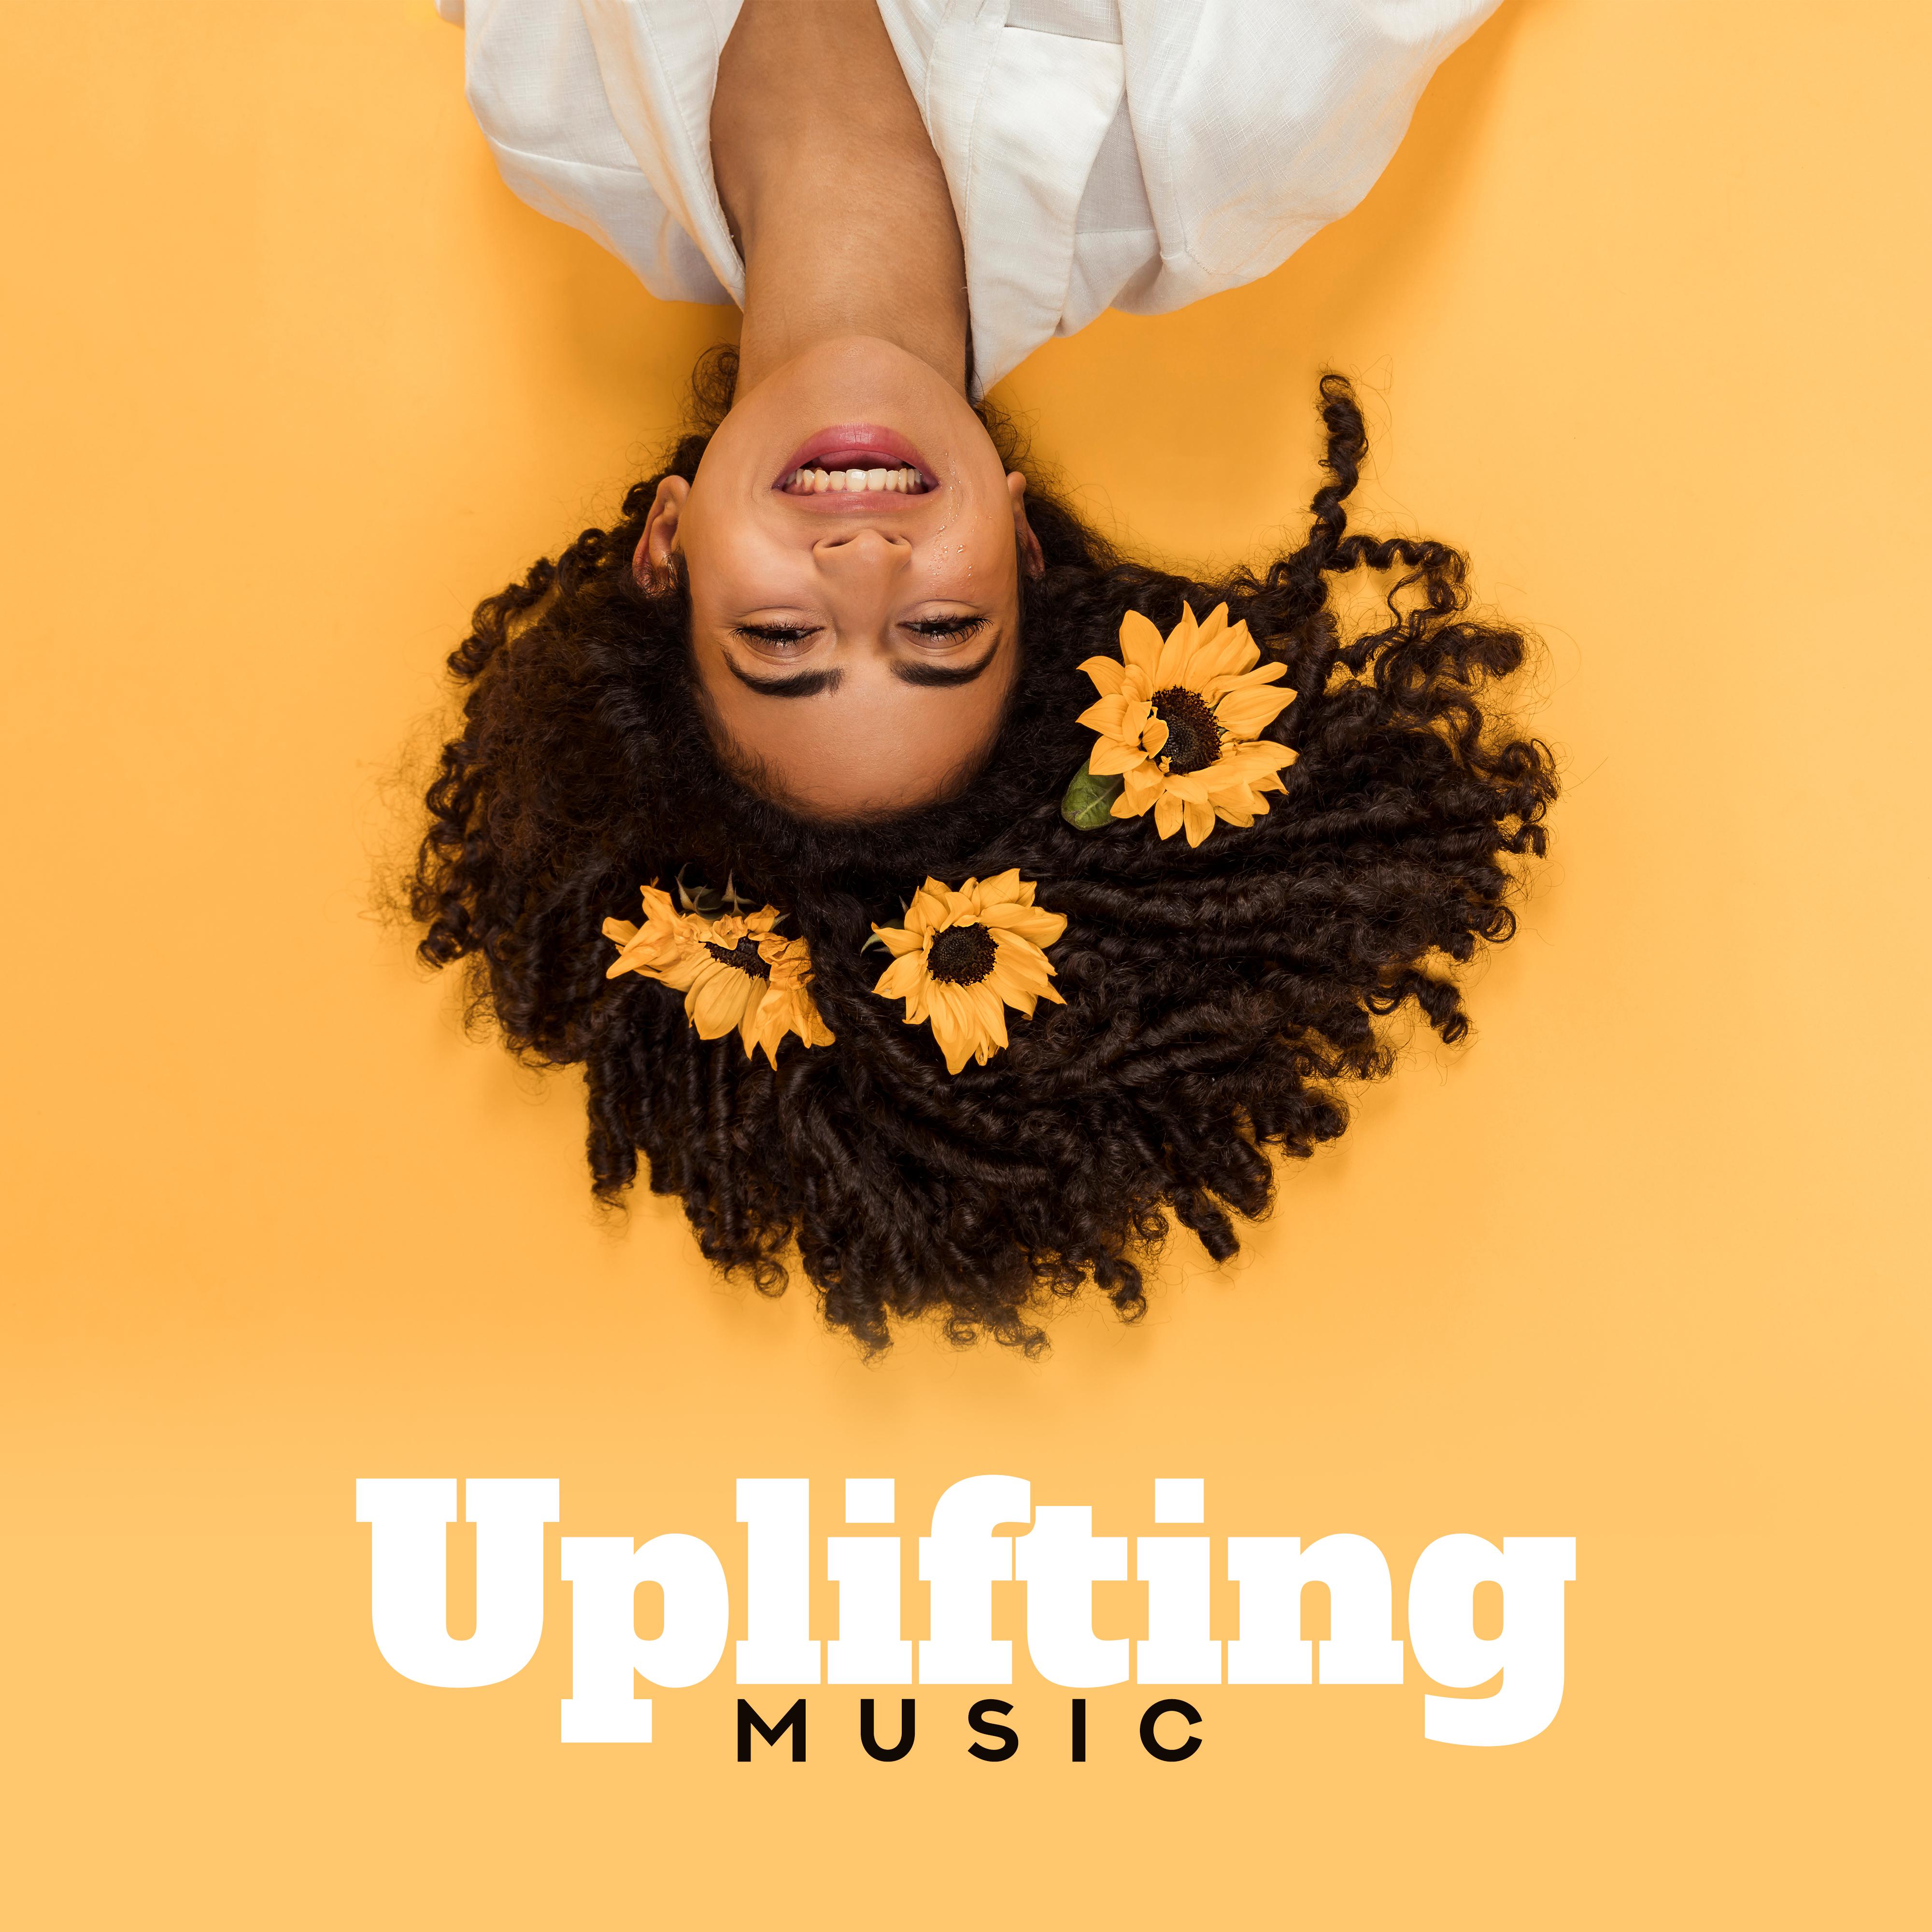 Uplifting Music - Jazz Edition of Instrumental Music that Improves Well-being and Mood